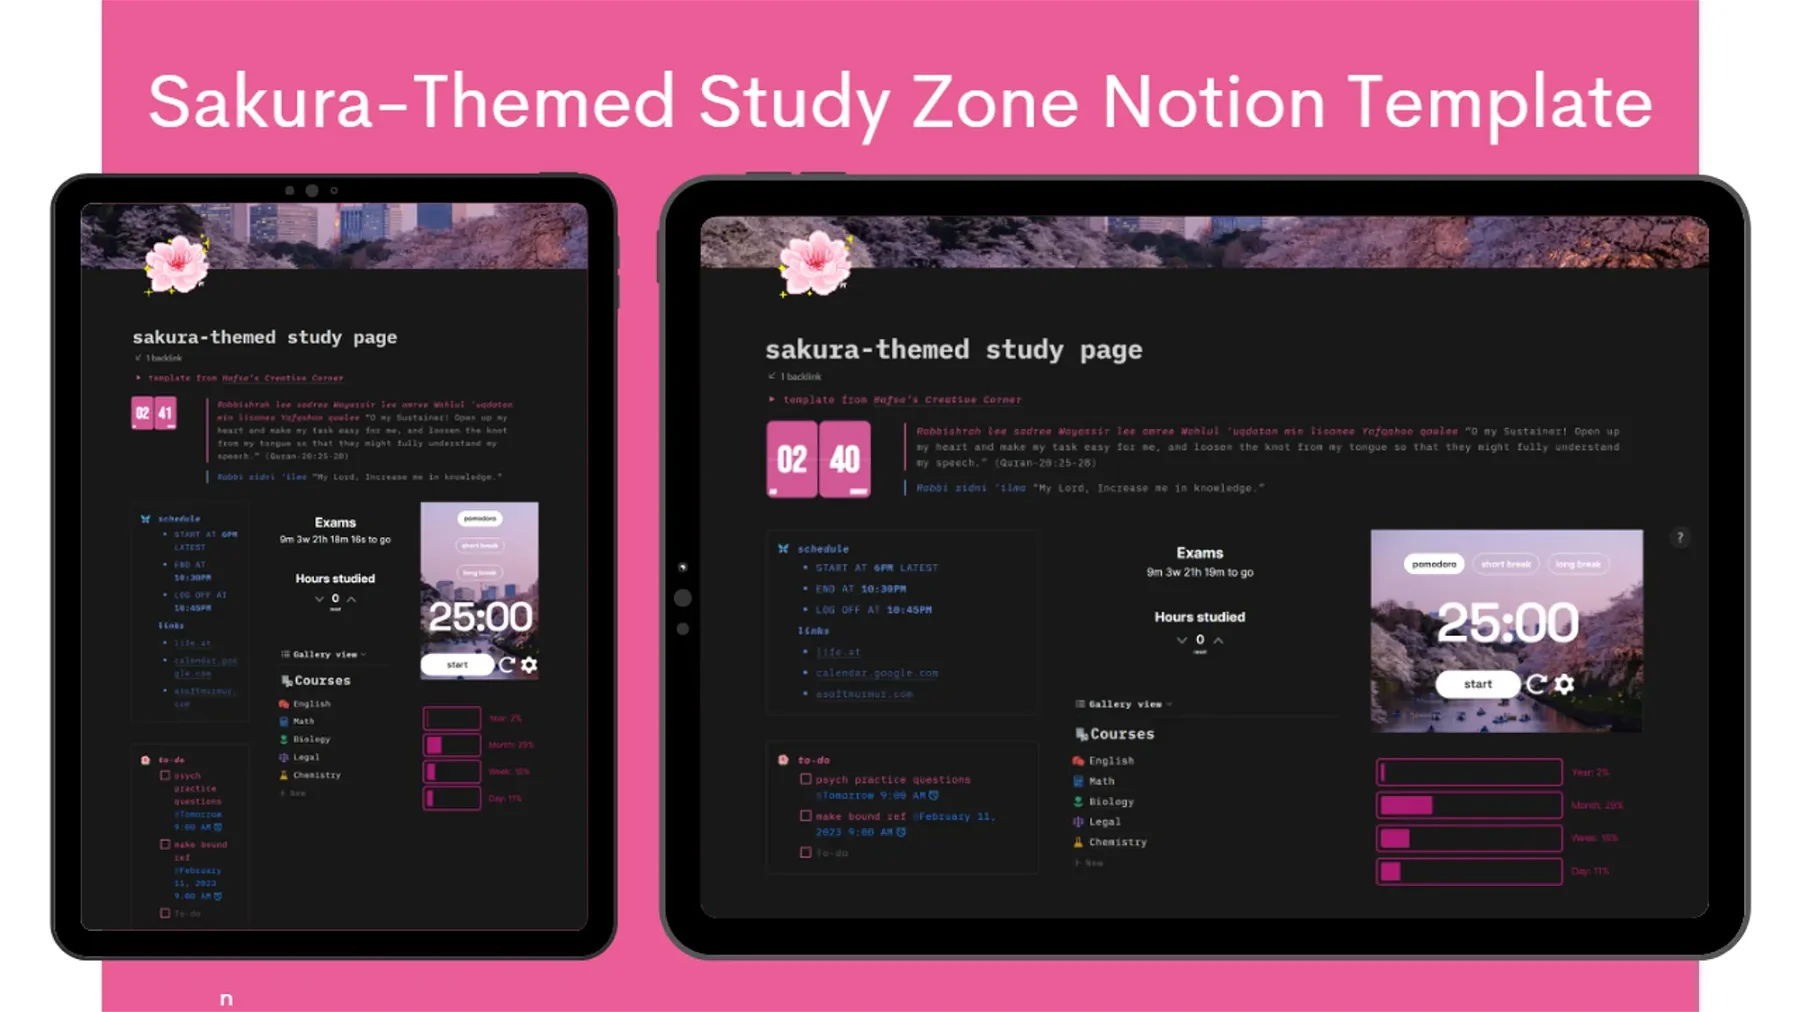 Free Sakura-Themed Study Zone Notion Template for Students